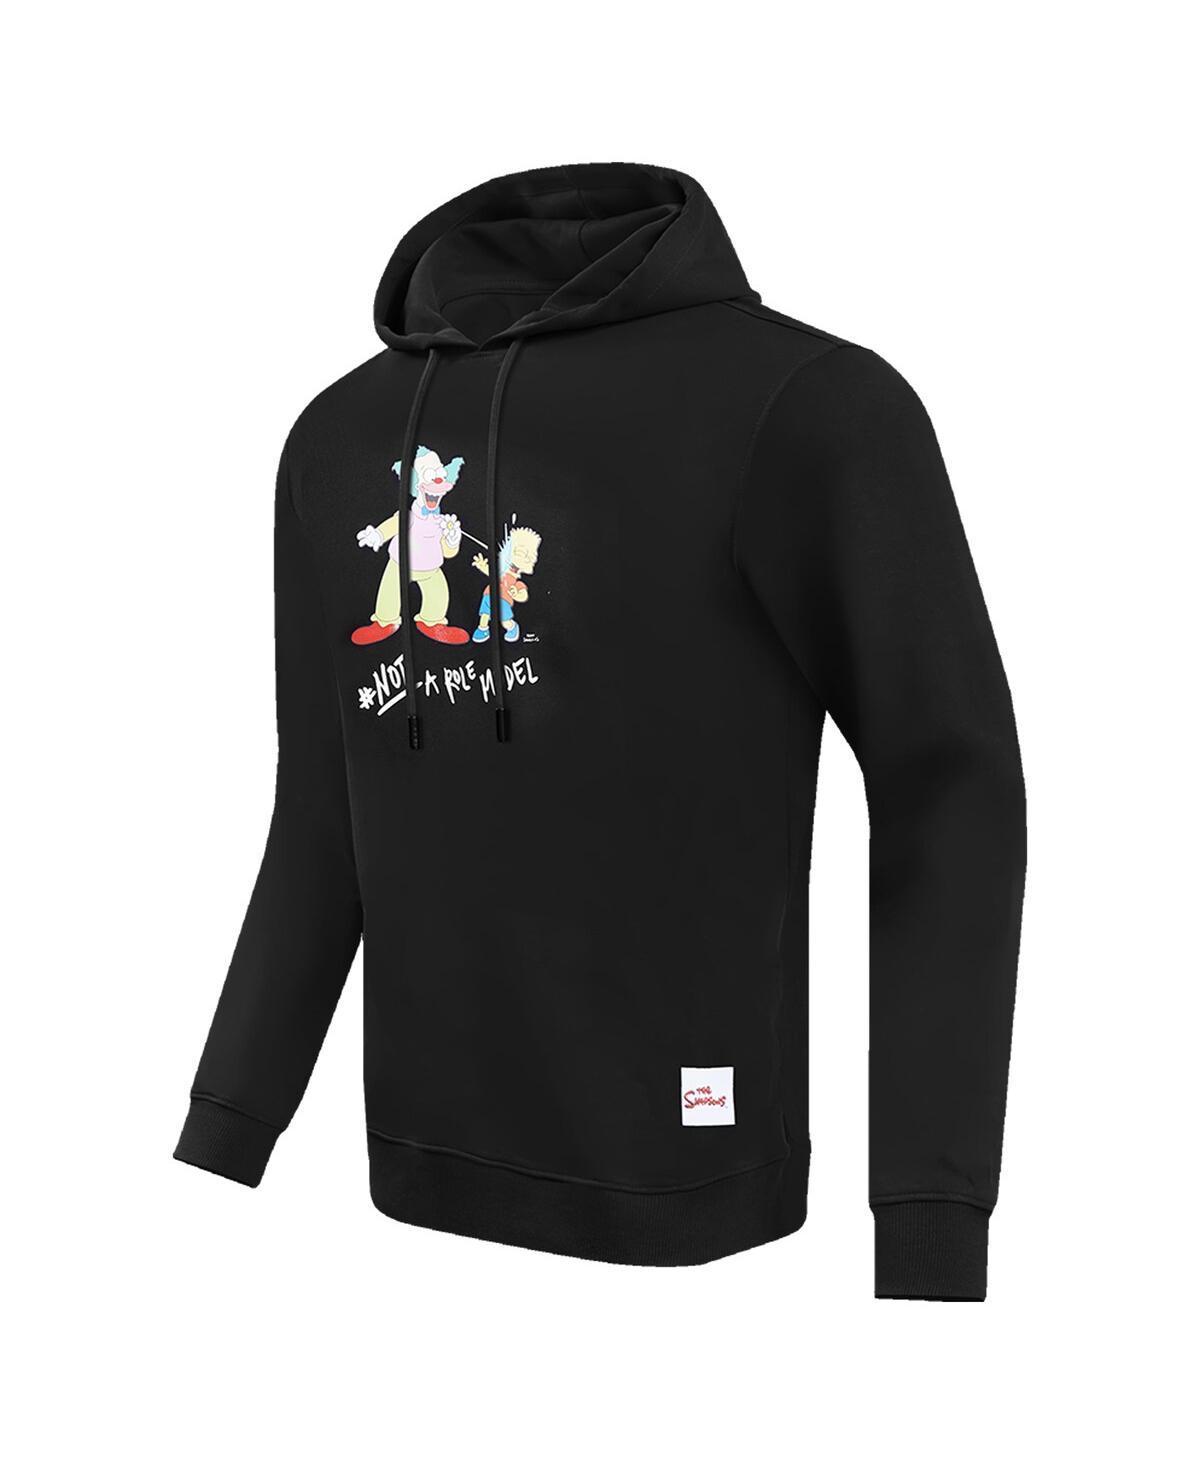 Shop Freeze Max Men's  Black The Simpsons Krusty Not A Role Model Pullover Hoodie